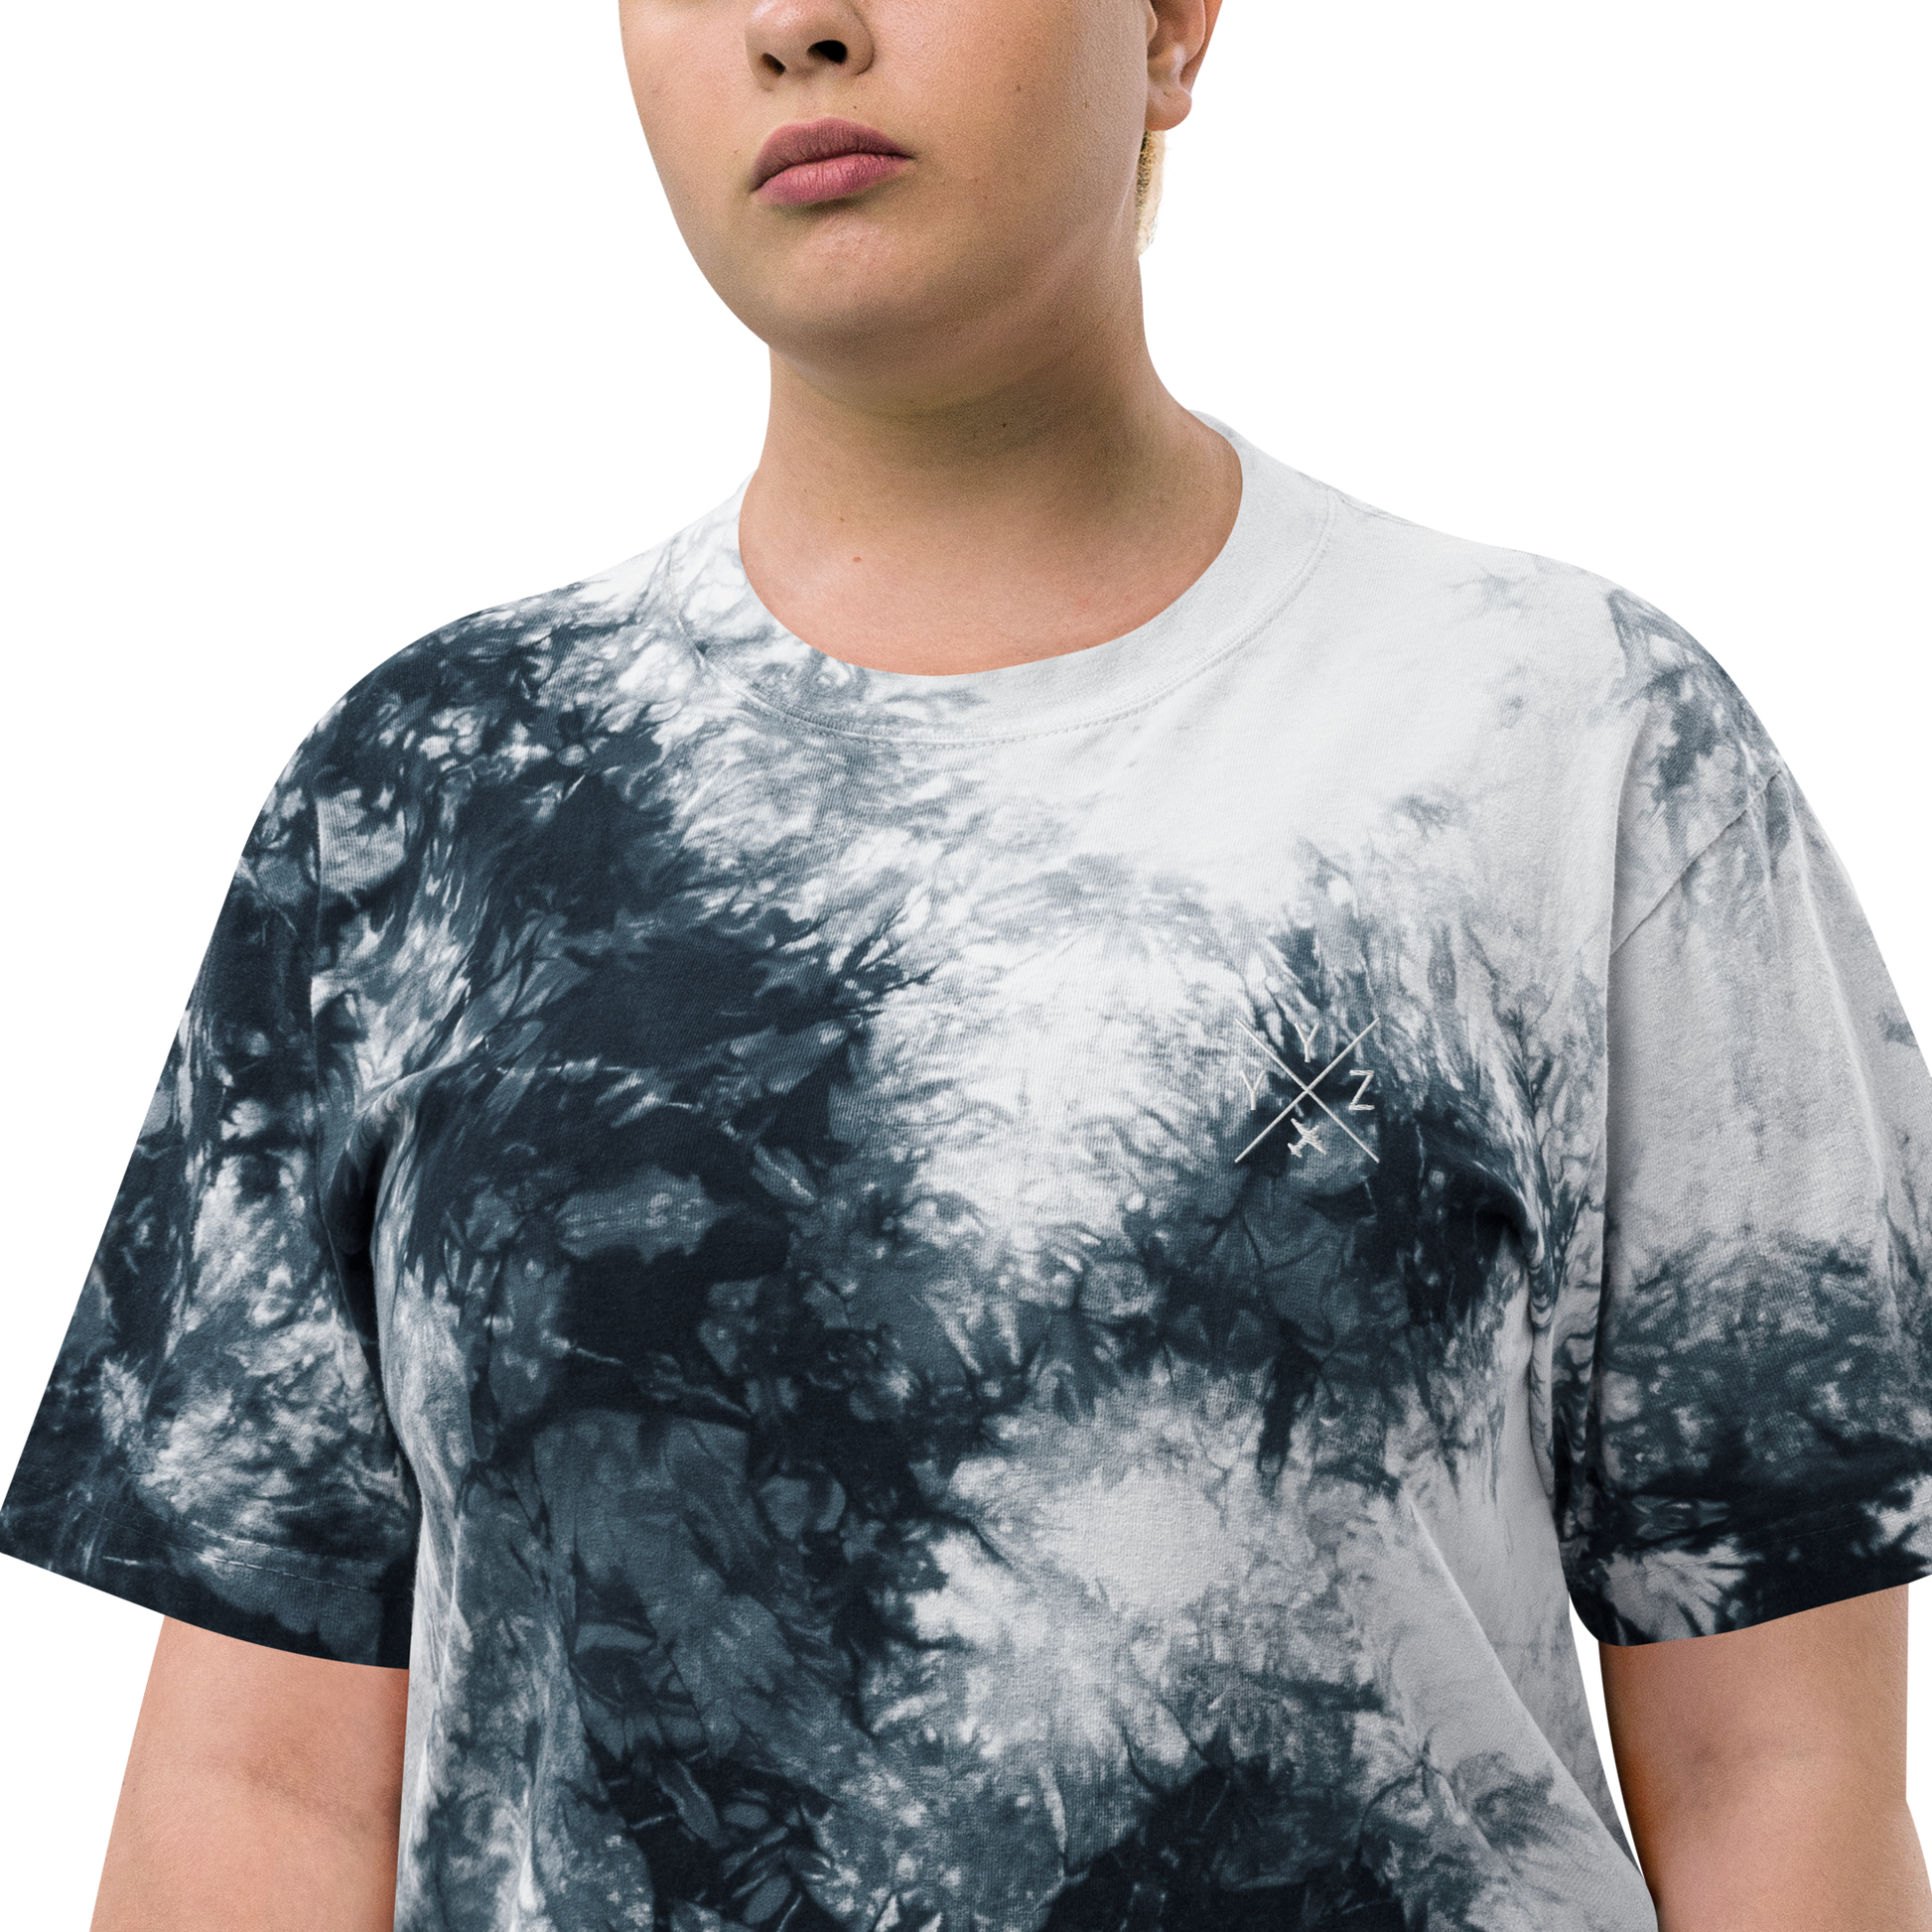 YHM Designs - YYZ Toronto Oversized Tie-Dye T-Shirt - Crossed-X Design with Airport Code and Vintage Propliner - White Embroidery - Image 18